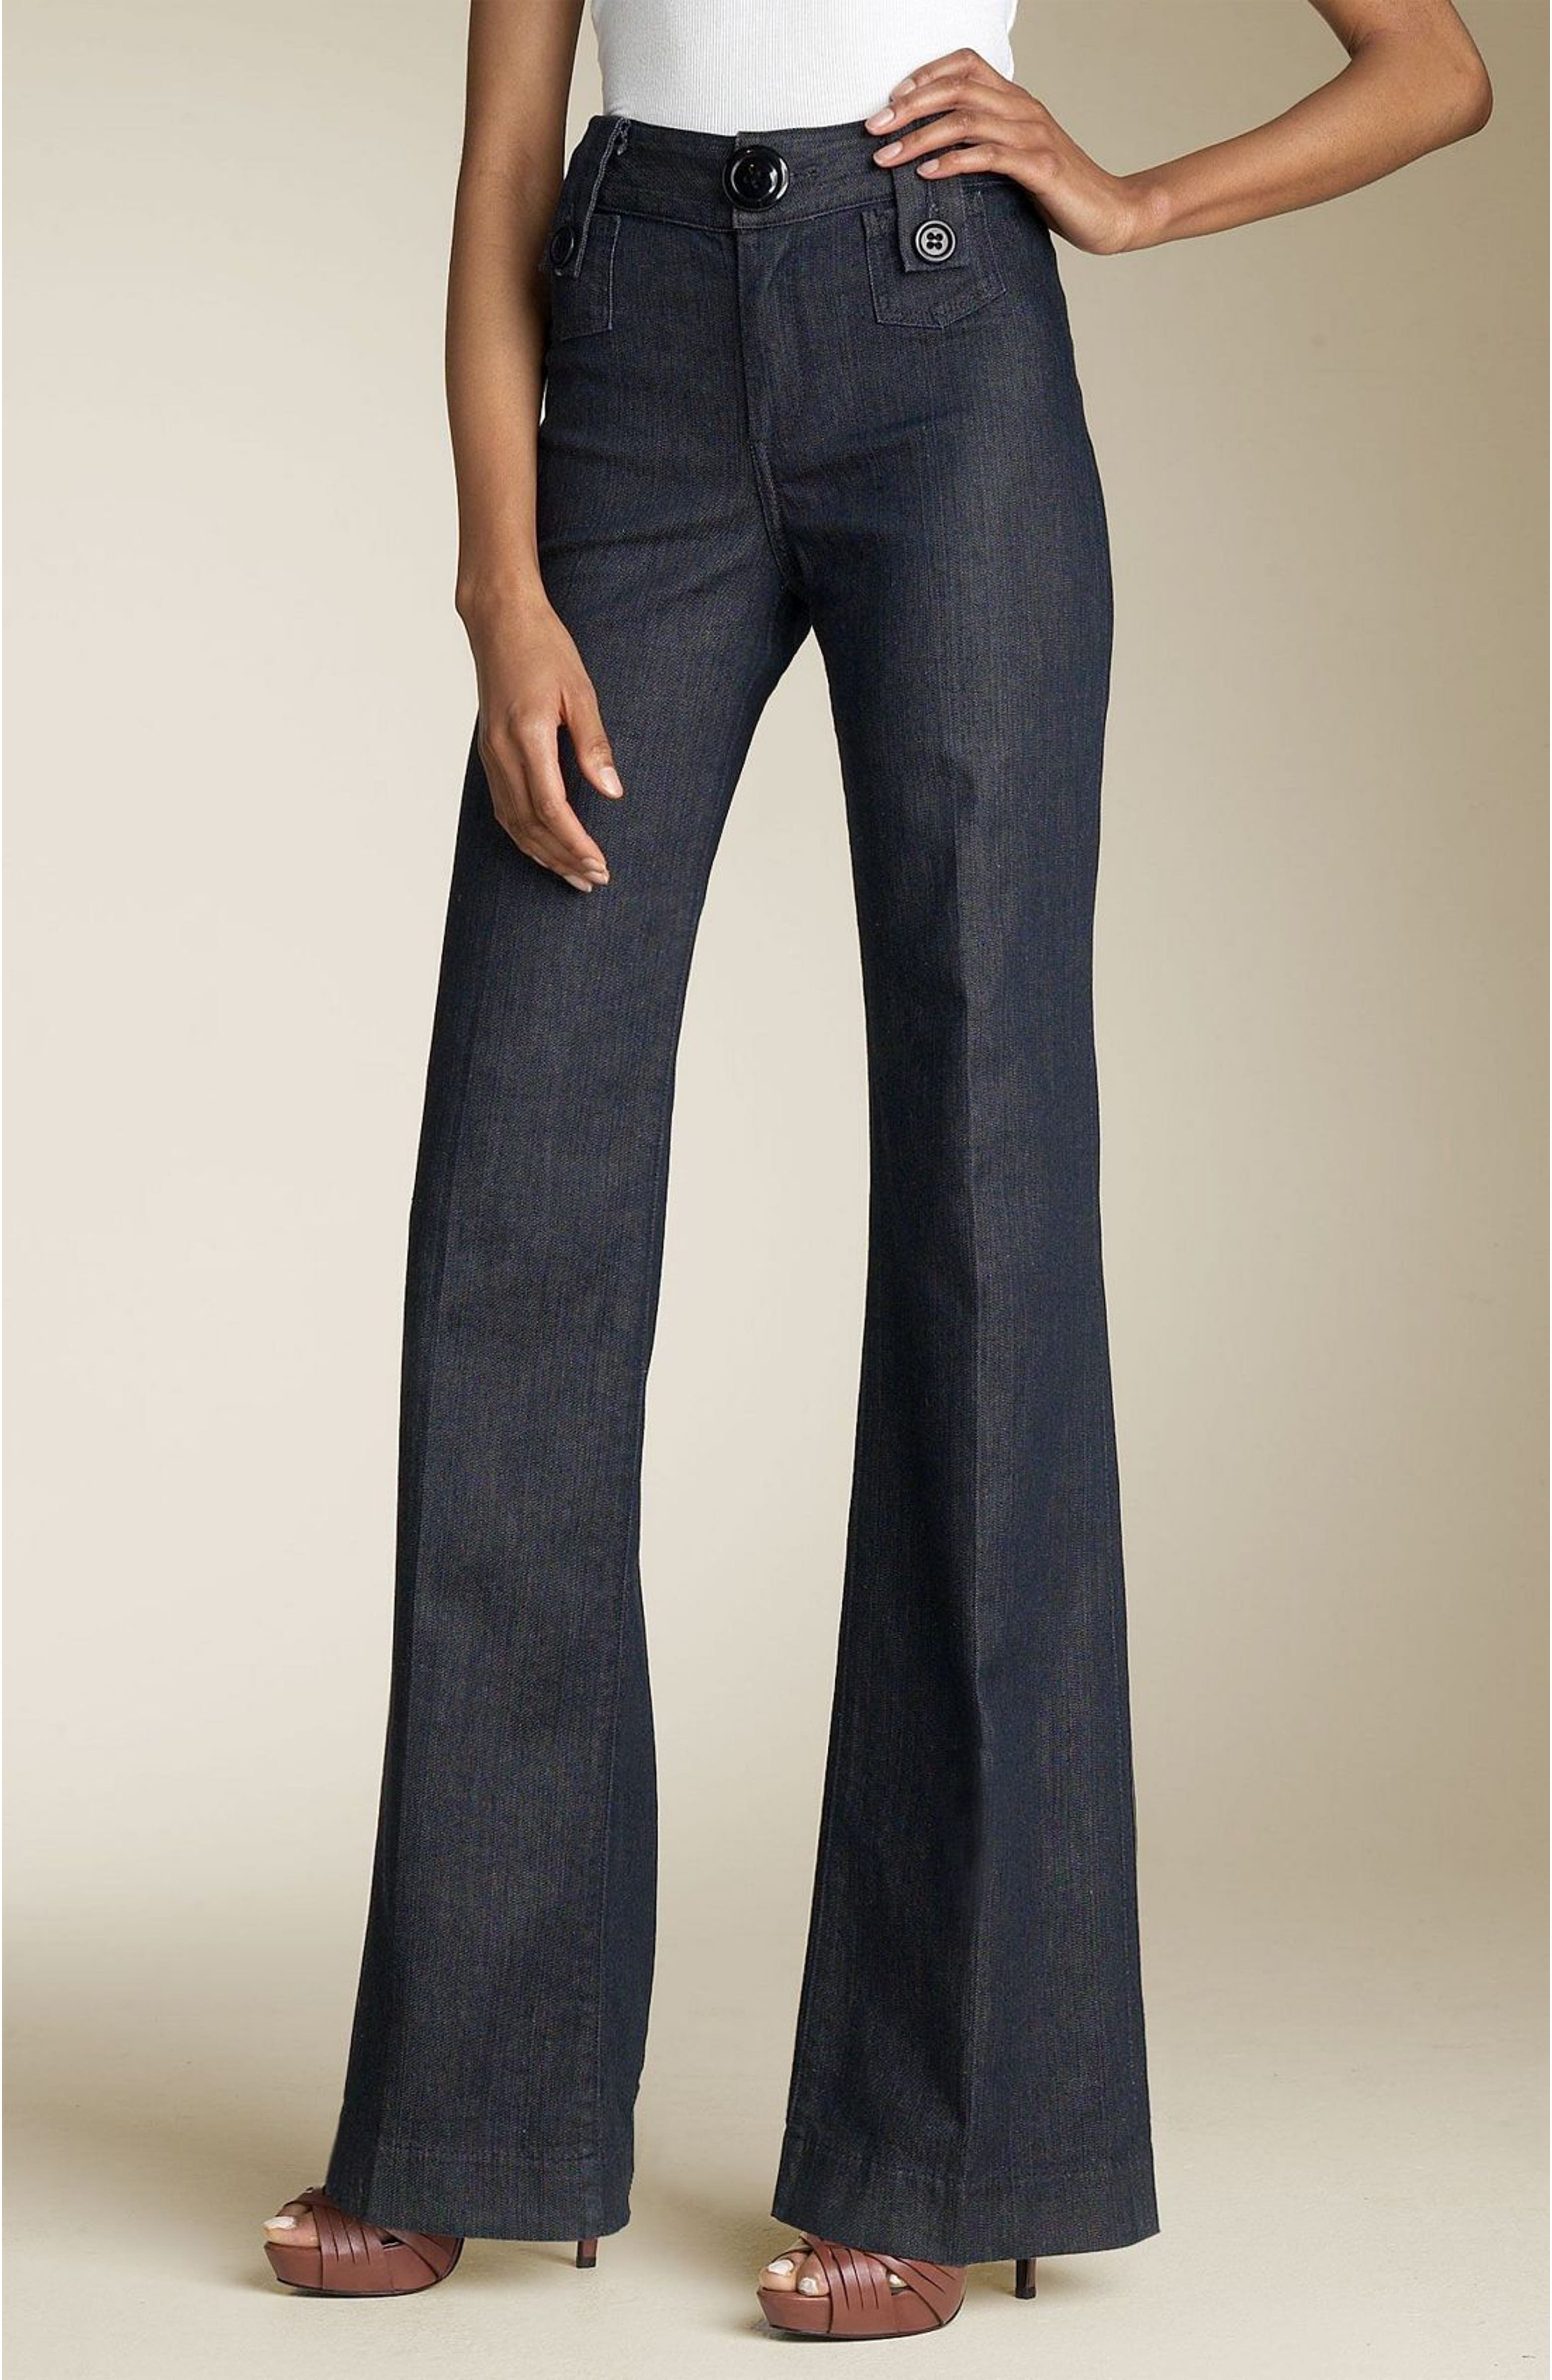 Goldsign 'Treo' High Waist Wide Leg Stretch Jeans | Nordstrom